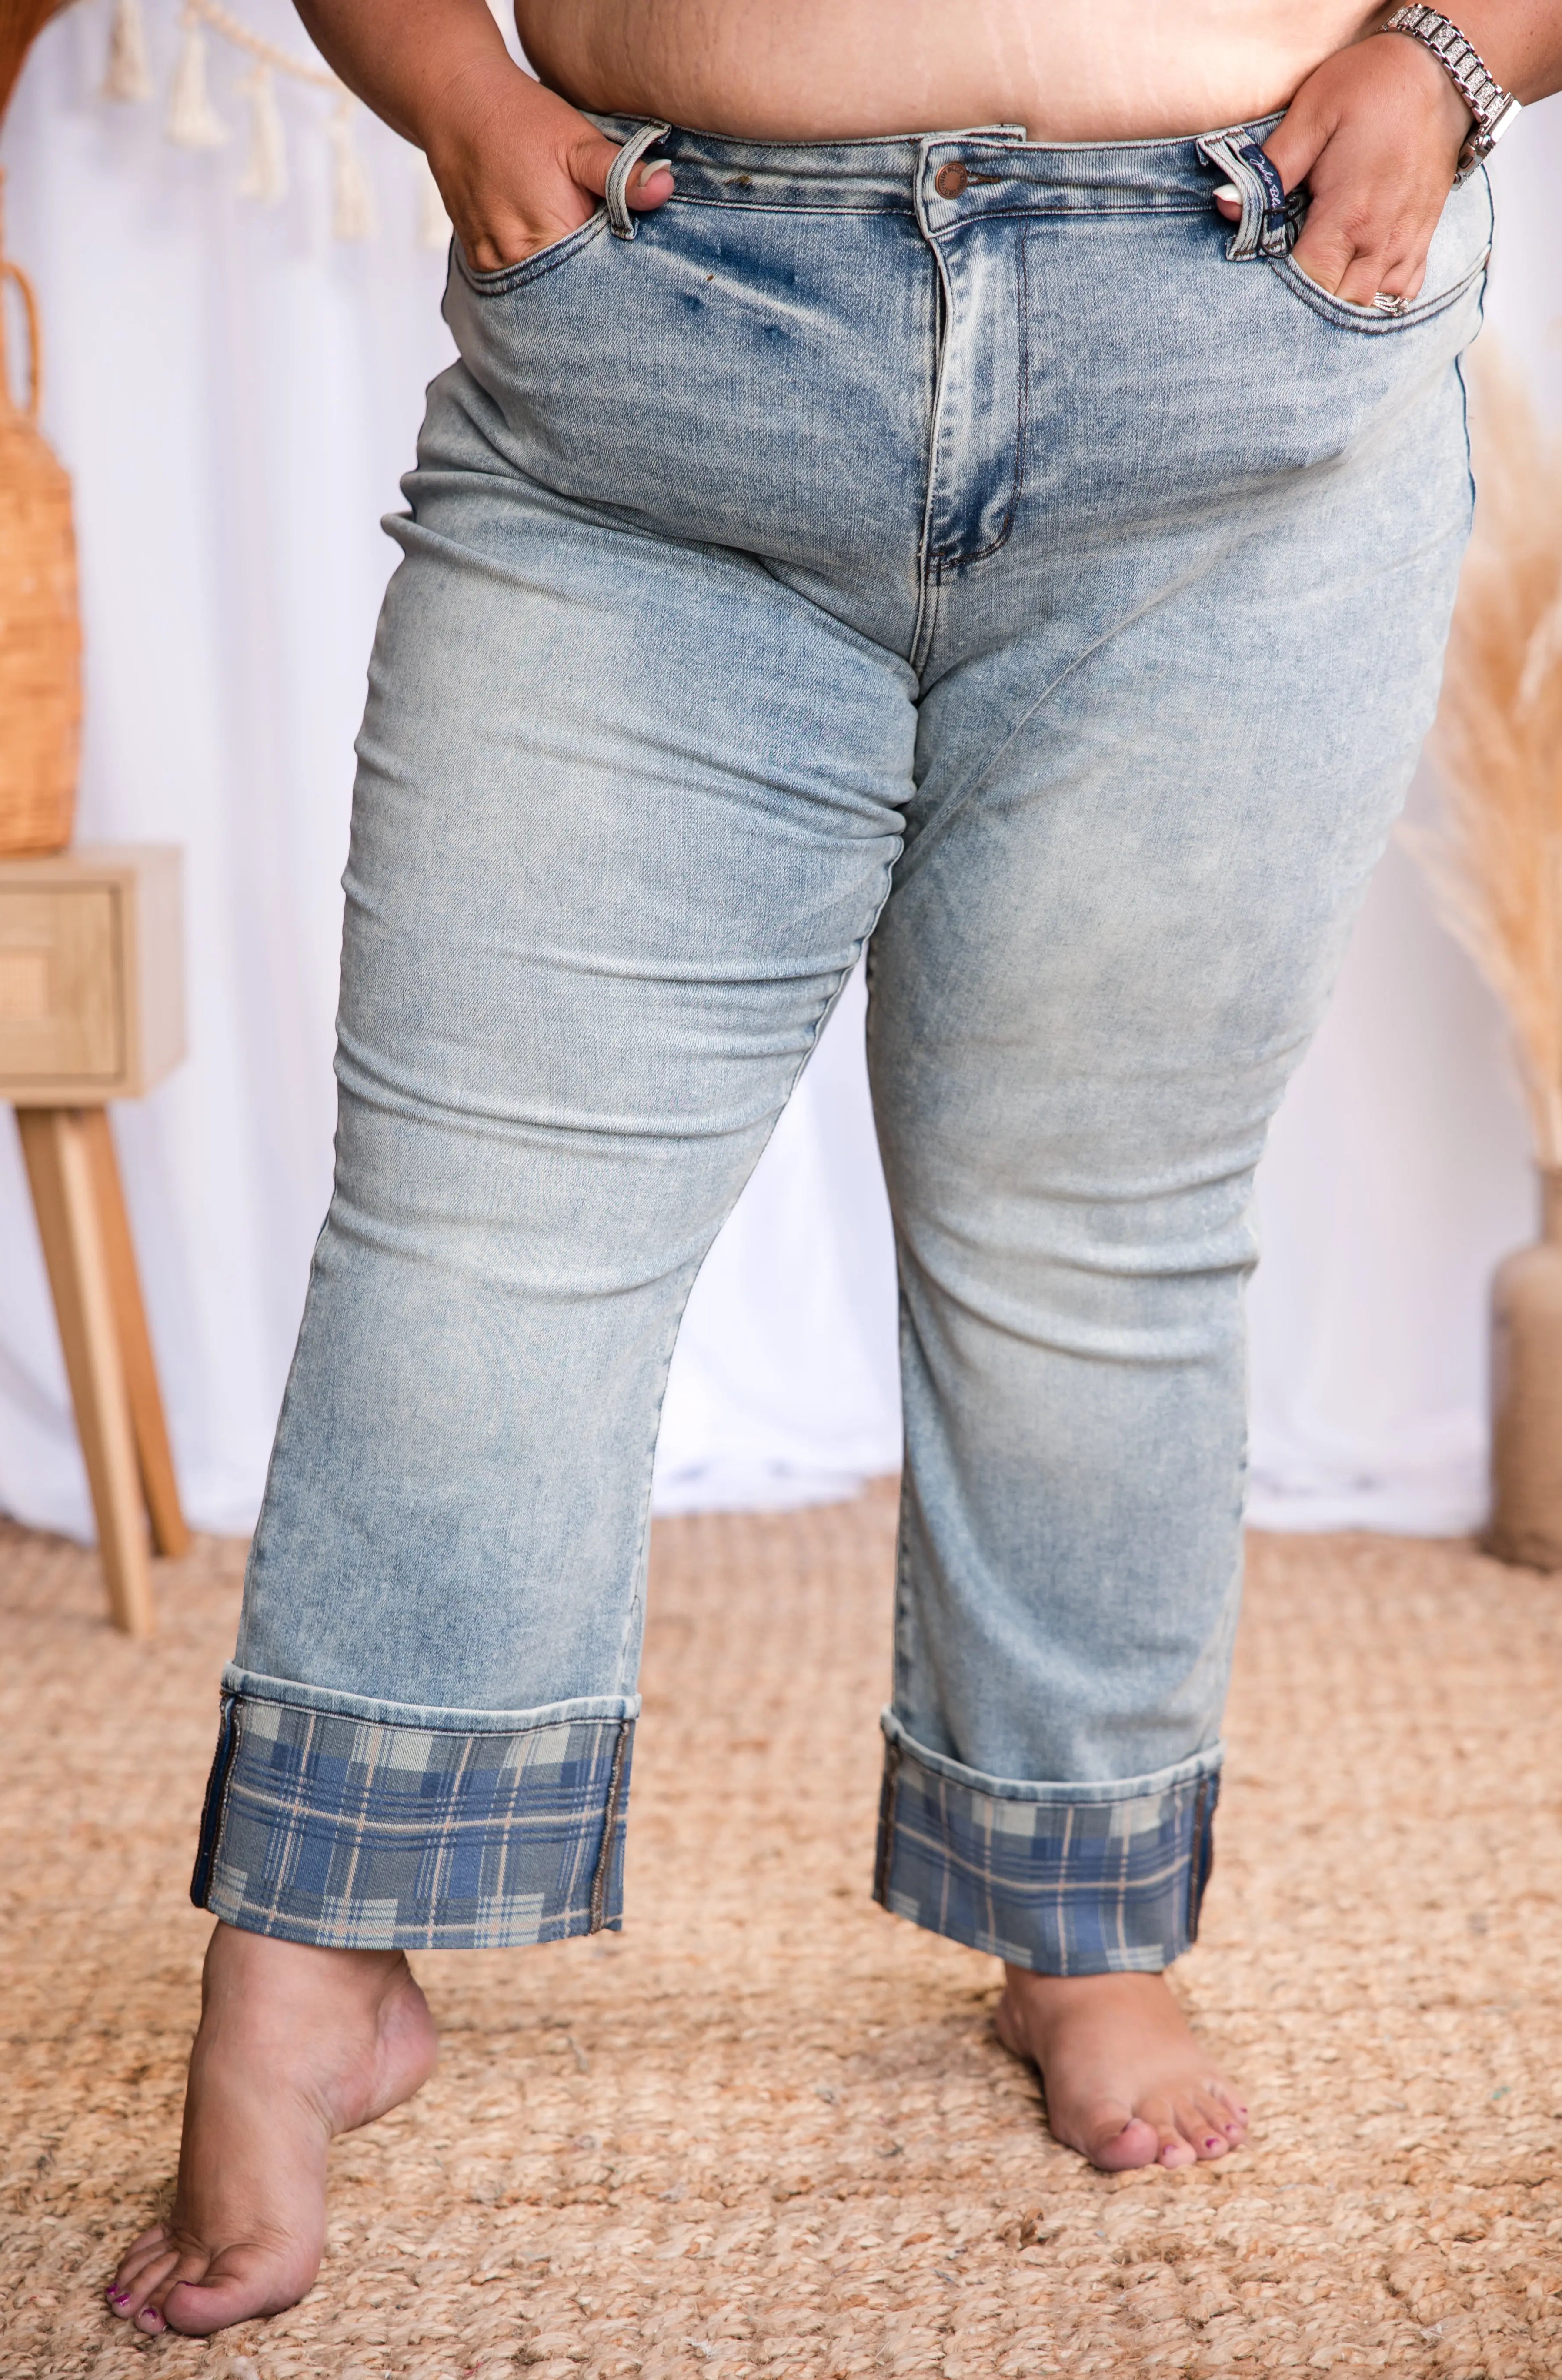 Touch of Plaid - Judy Blue Jeans JB Boutique Simplified